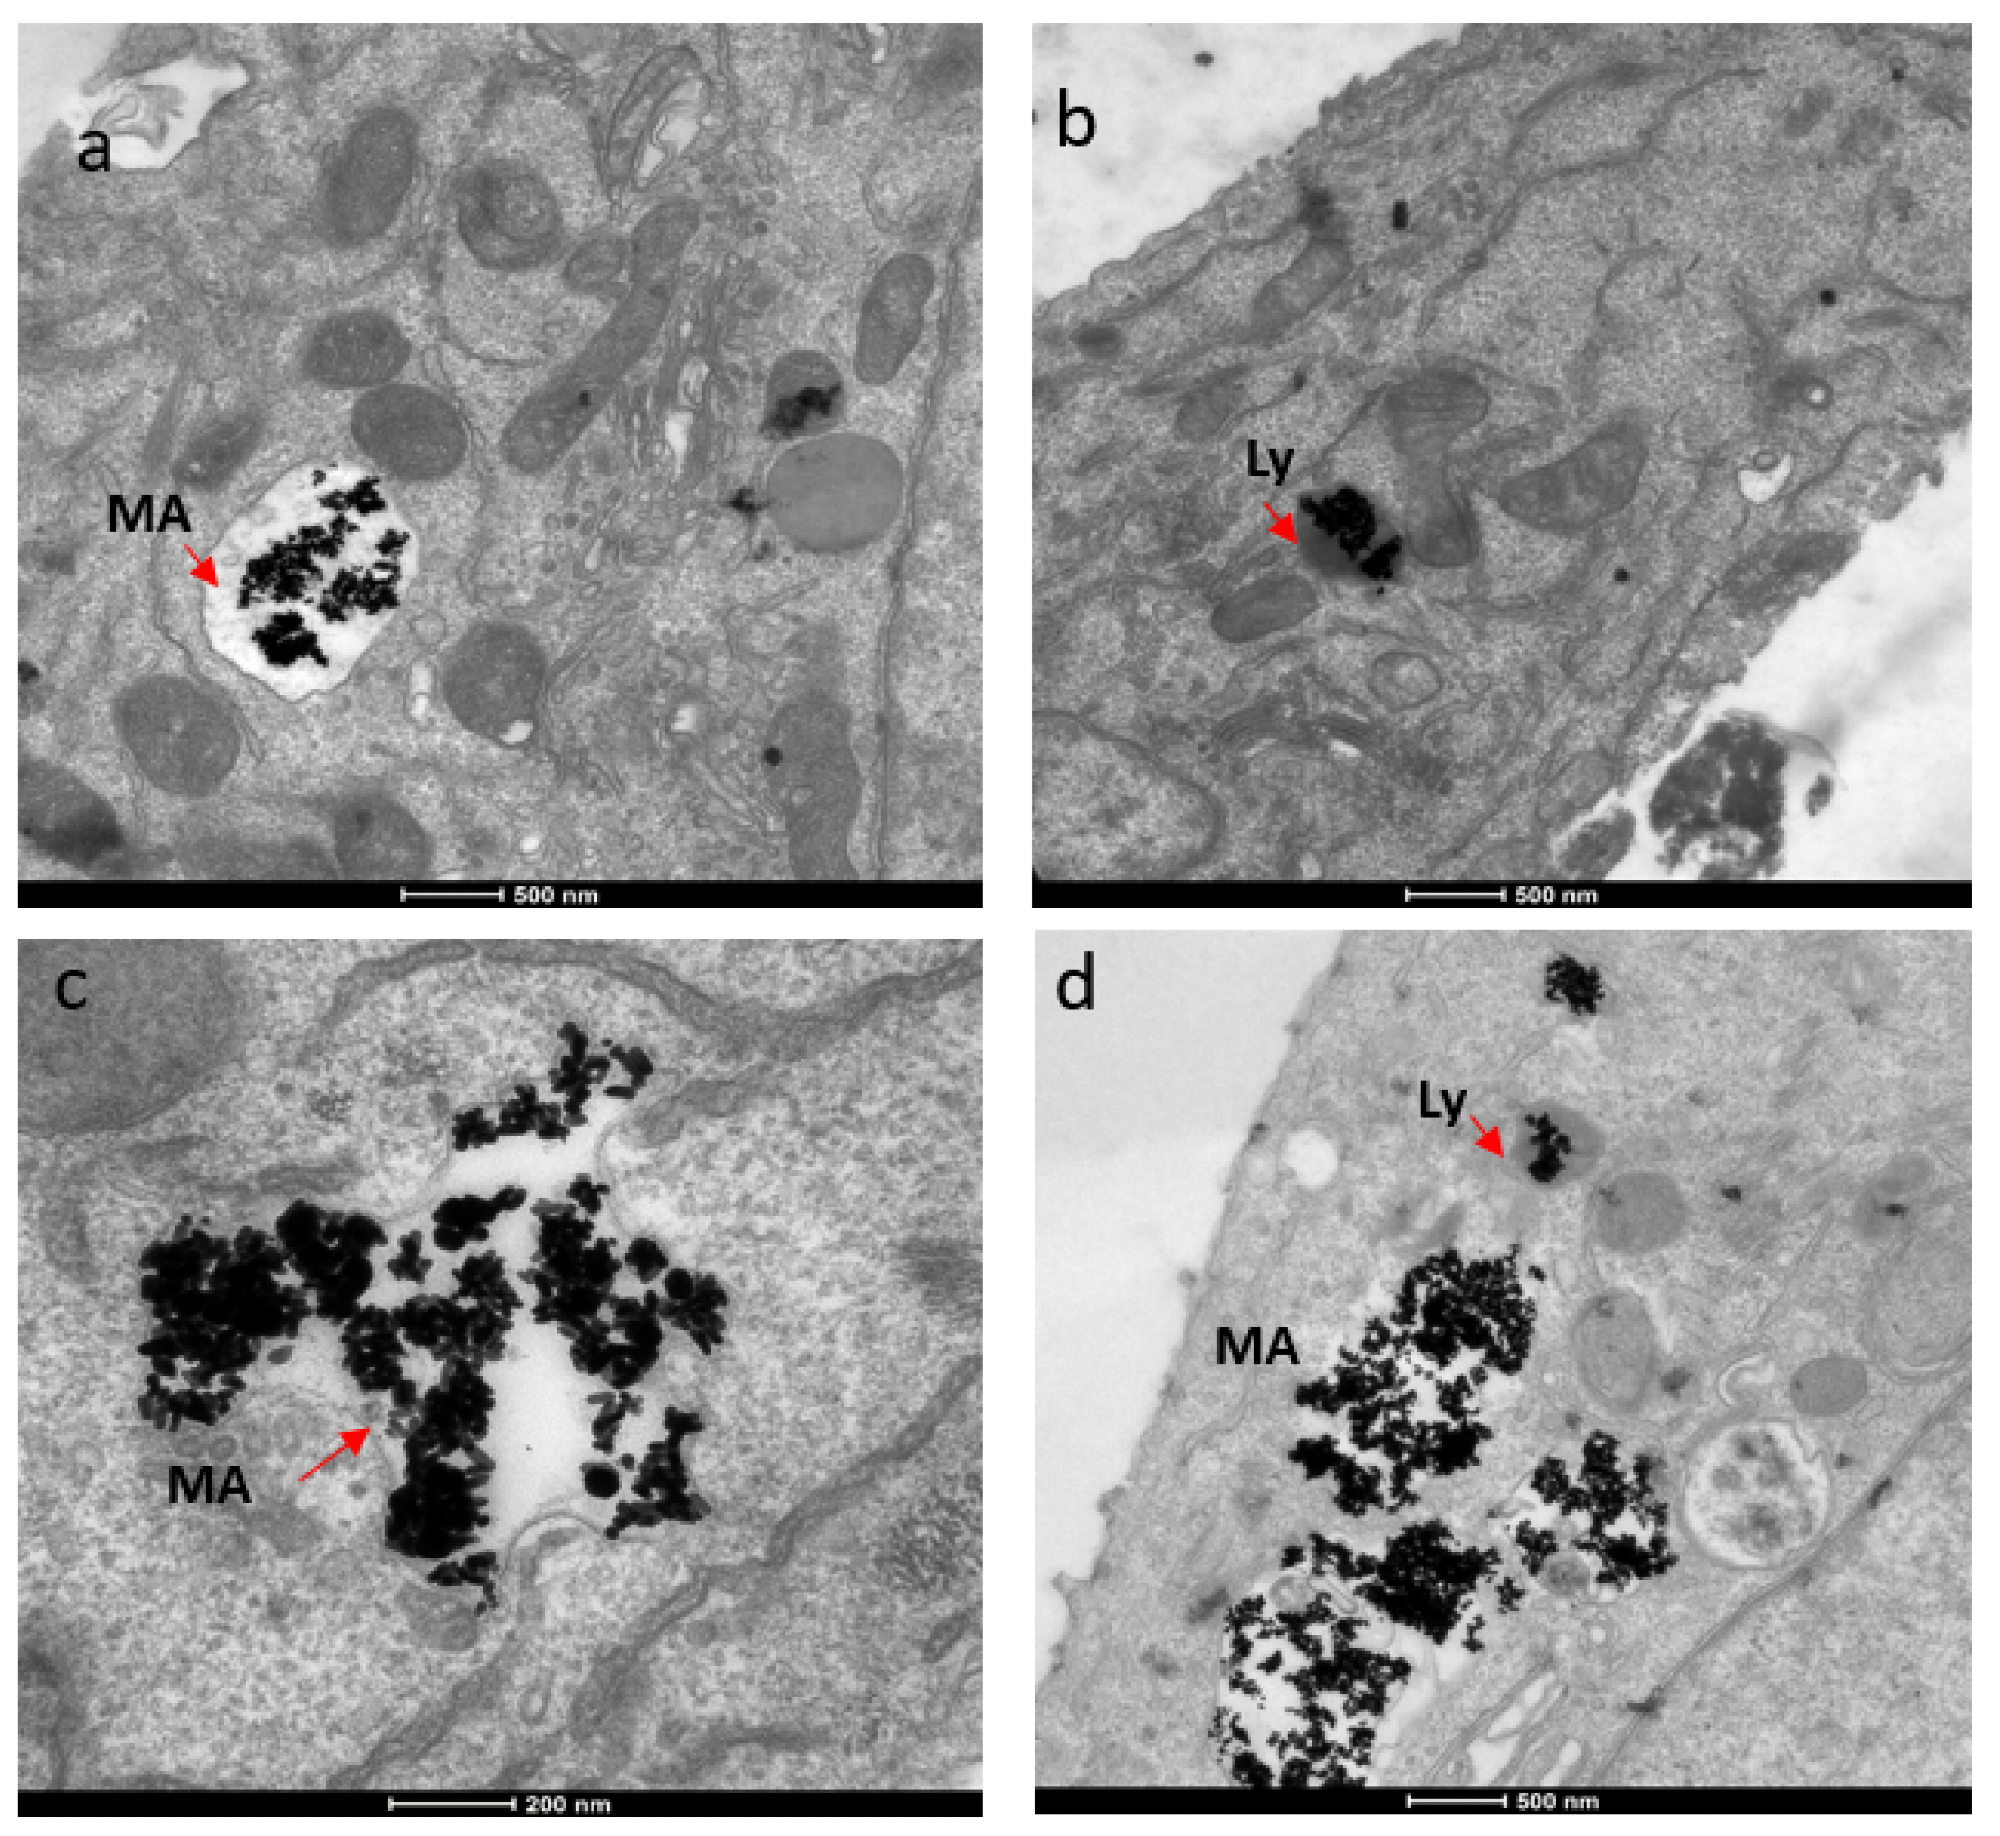 TEM images showing localization of gold nanorods in macropinosomes and lysosomes in both SKBR-3 and MCF-7 cell lines. AuNR localization in (a) macropinosomes (MA) and (b) lysosomes (Ly) of SKBR-3 cells. (c) Macropinosomes (MA) containing gold nanorods in MCF-7 and (d) lysosomes (Ly) containing gold nanorods in MCF-7. Red arrows point out macropinosomes and lysosomes containing gold nanorods in each image. Electron photomicrographs shown are representative of at least three independent experiments with similar conditions.